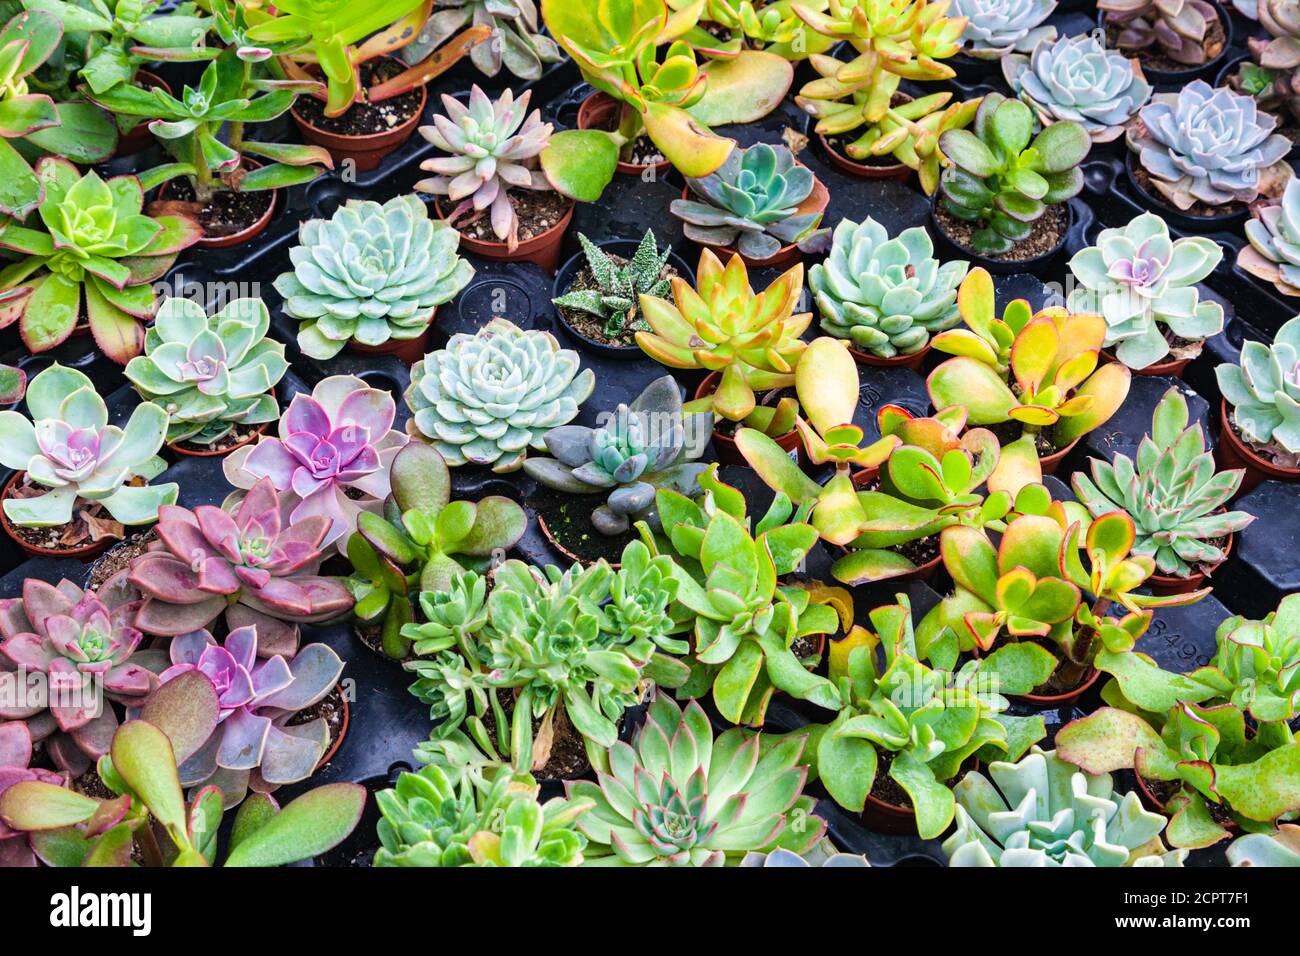 Variety of succulents for sale in a garden centre in Steveston Village British Columbia Canada Stock Photo